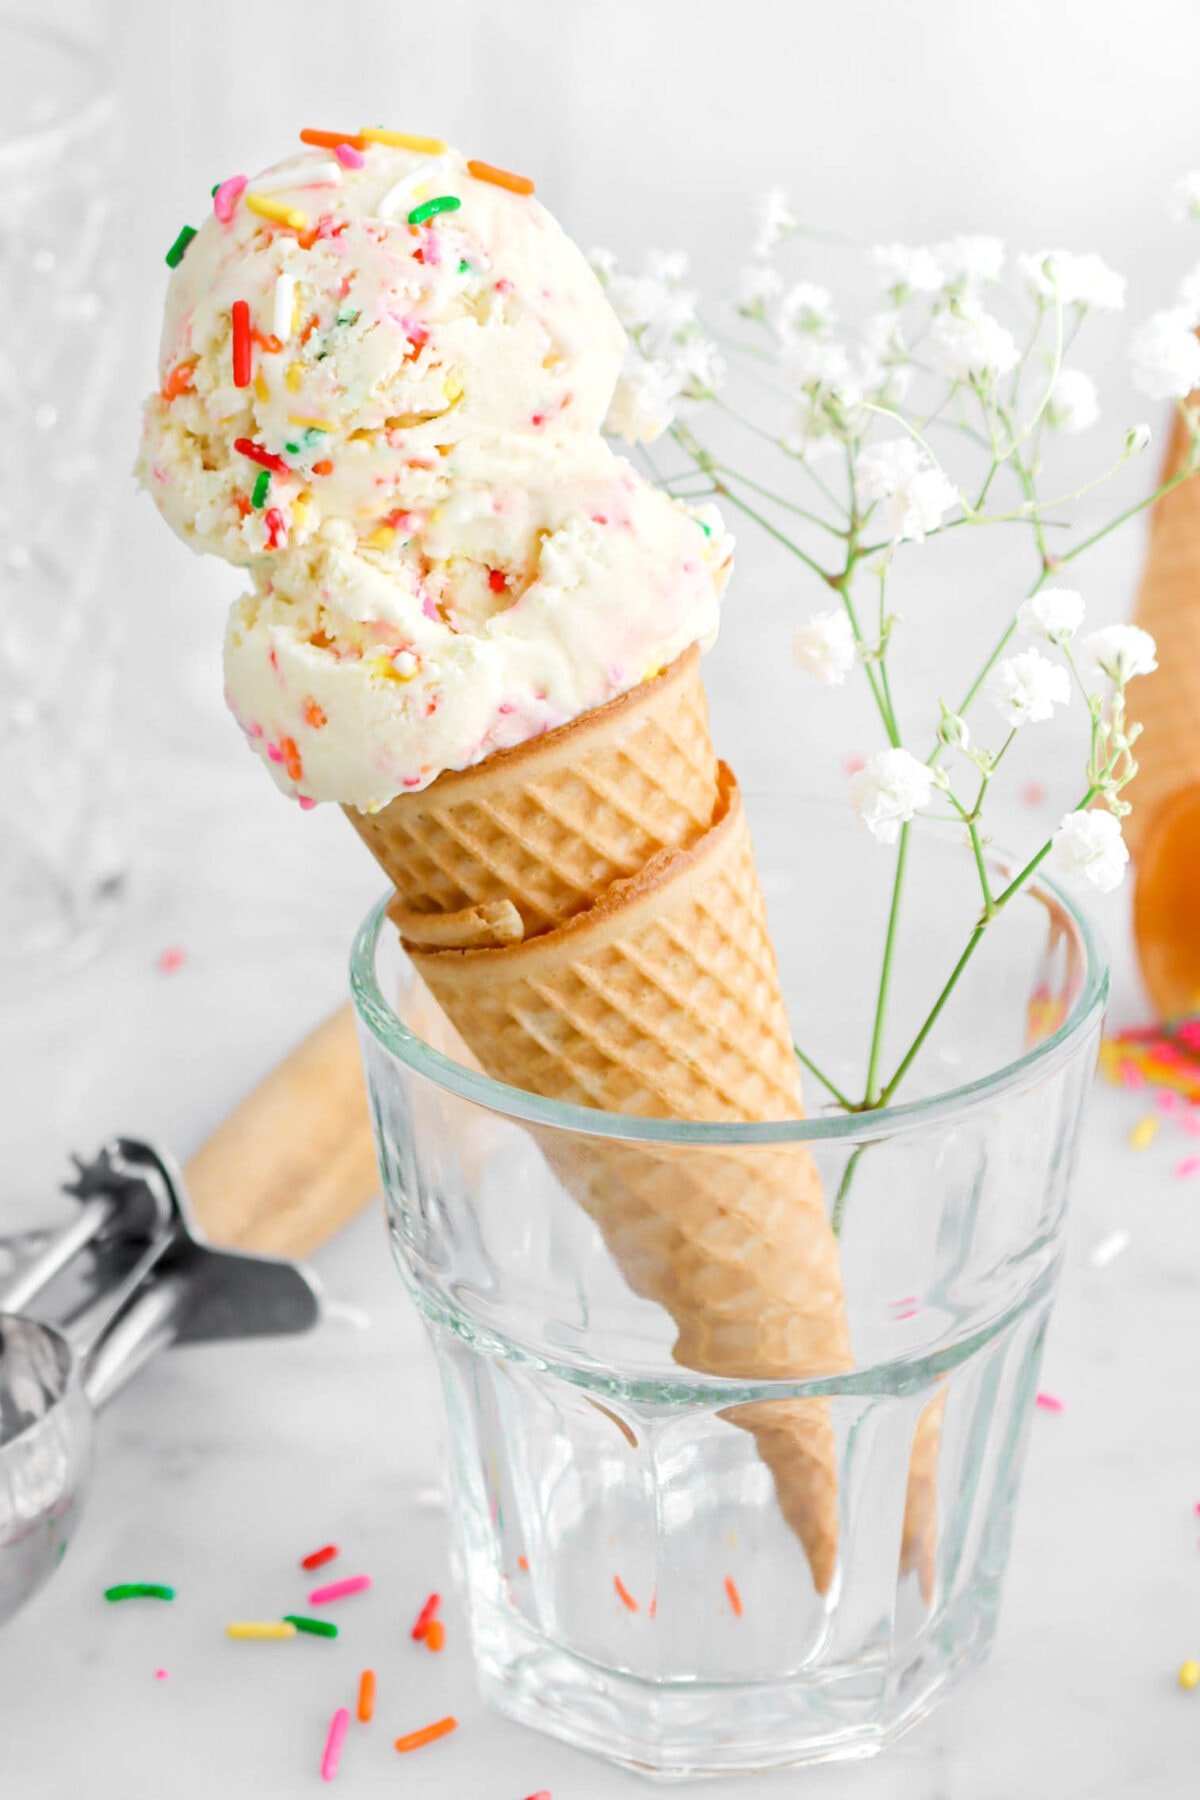 angled close up of two scoops of birthday cake ice cream in two stacked ice cream cones in milk glass with white flowers beside.